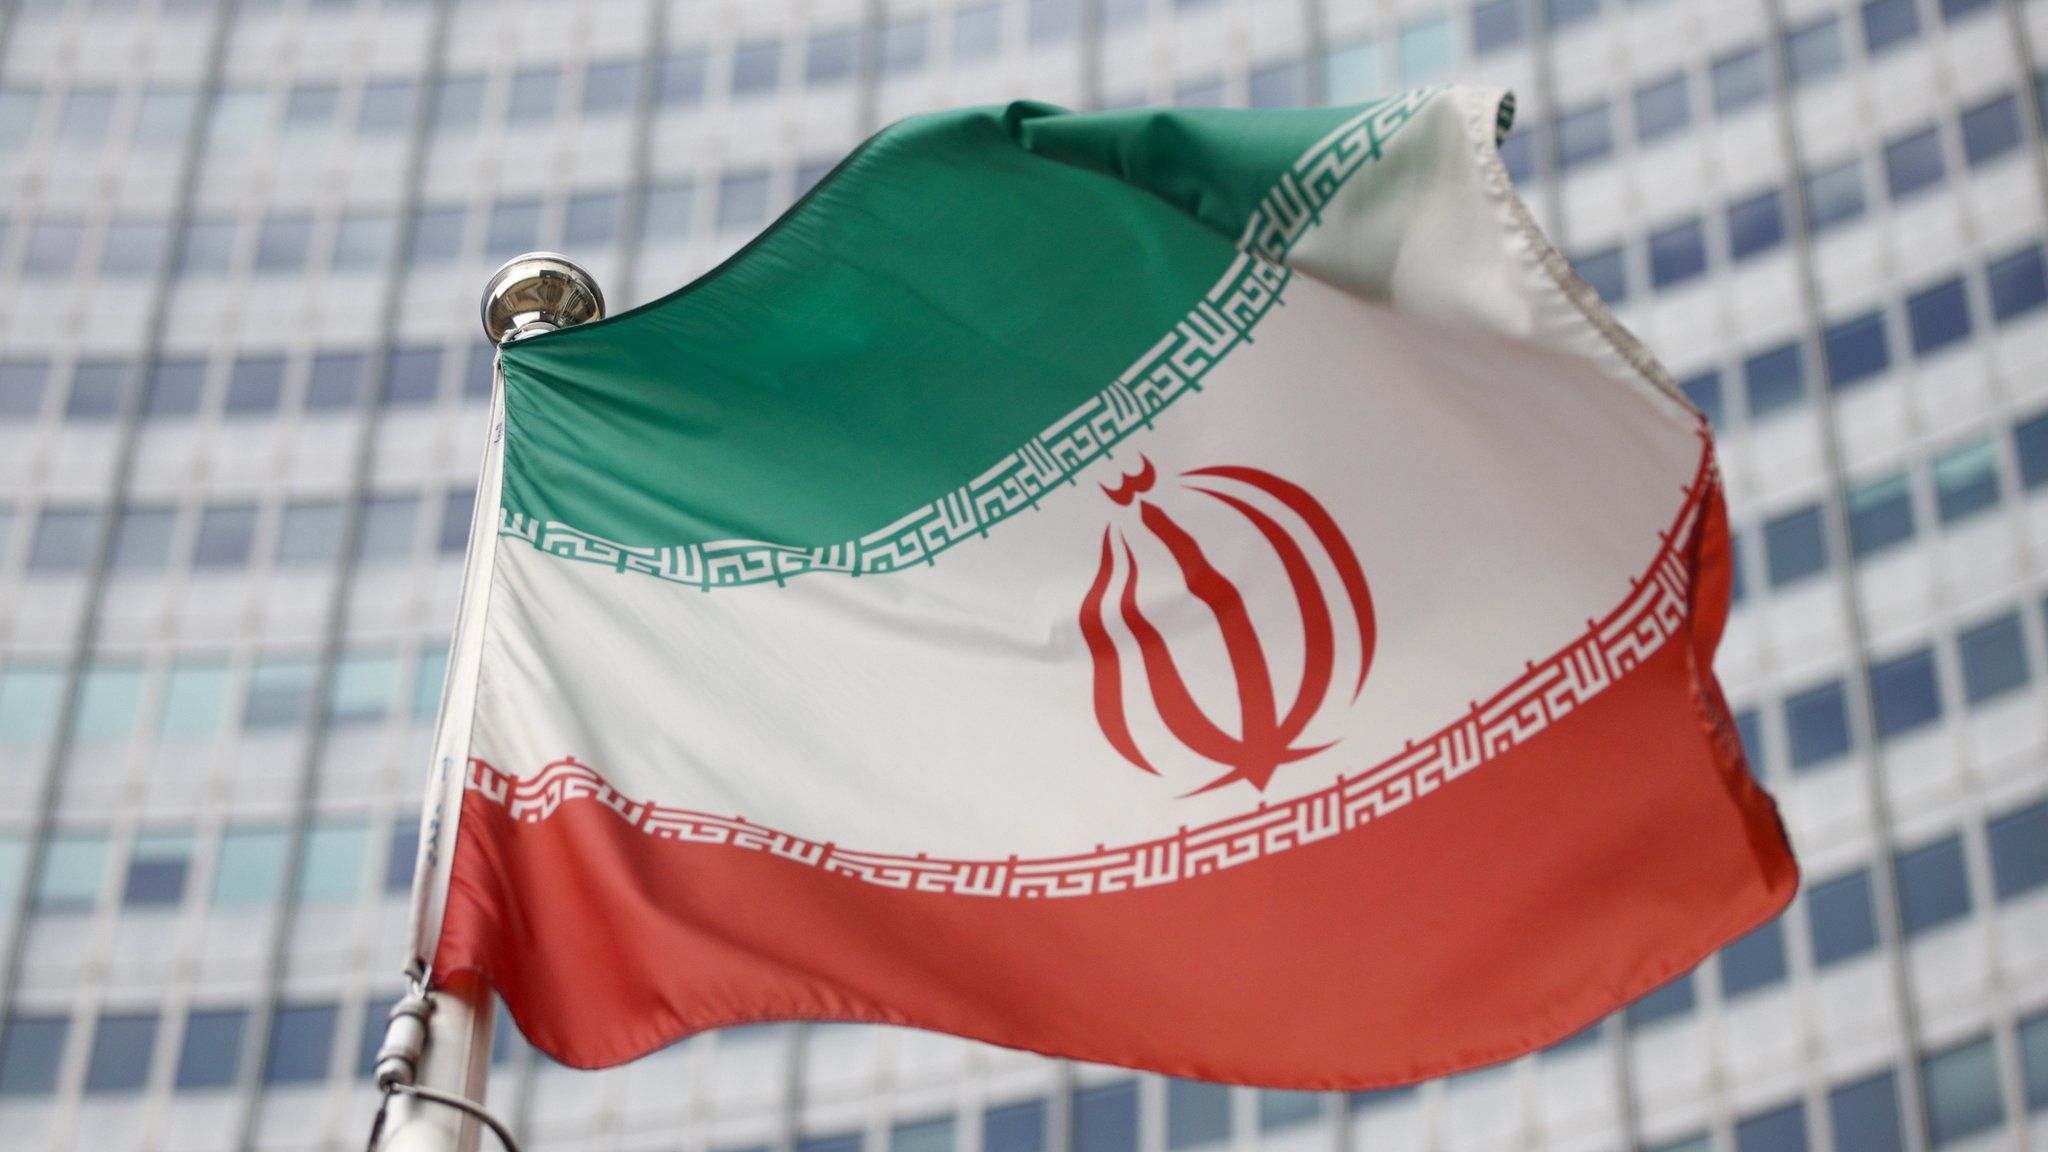 File photo showing flag of Iran flying in front of the headquarters of the International Atomic Energy Agency in Vienna, Austria